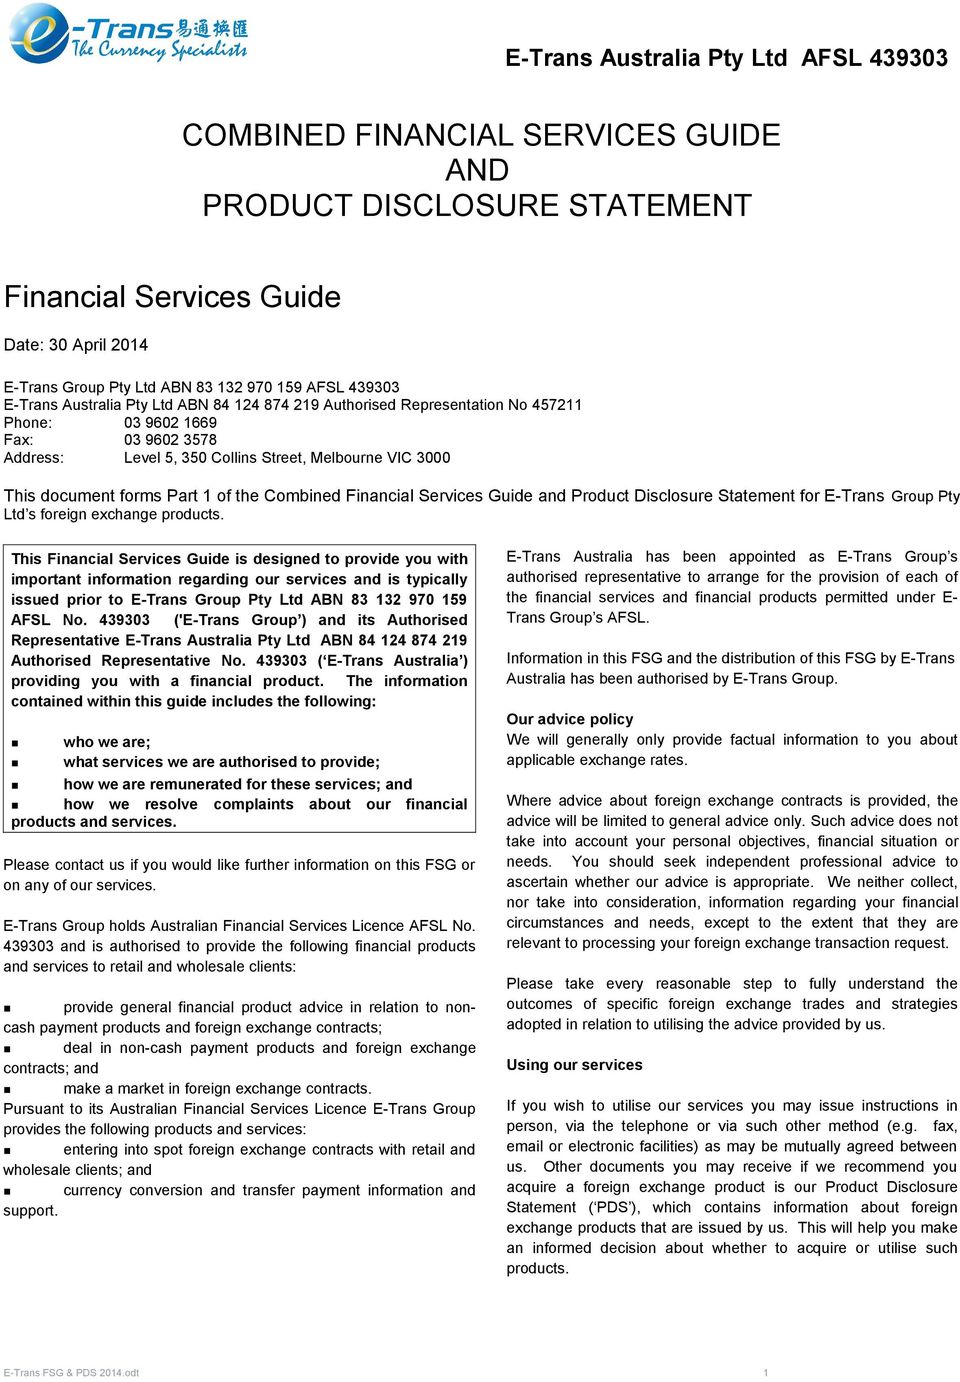 forms Part 1 of the Combined Financial Services Guide and Product Disclosure Statement for E-Trans Group Pty Ltd s foreign products.